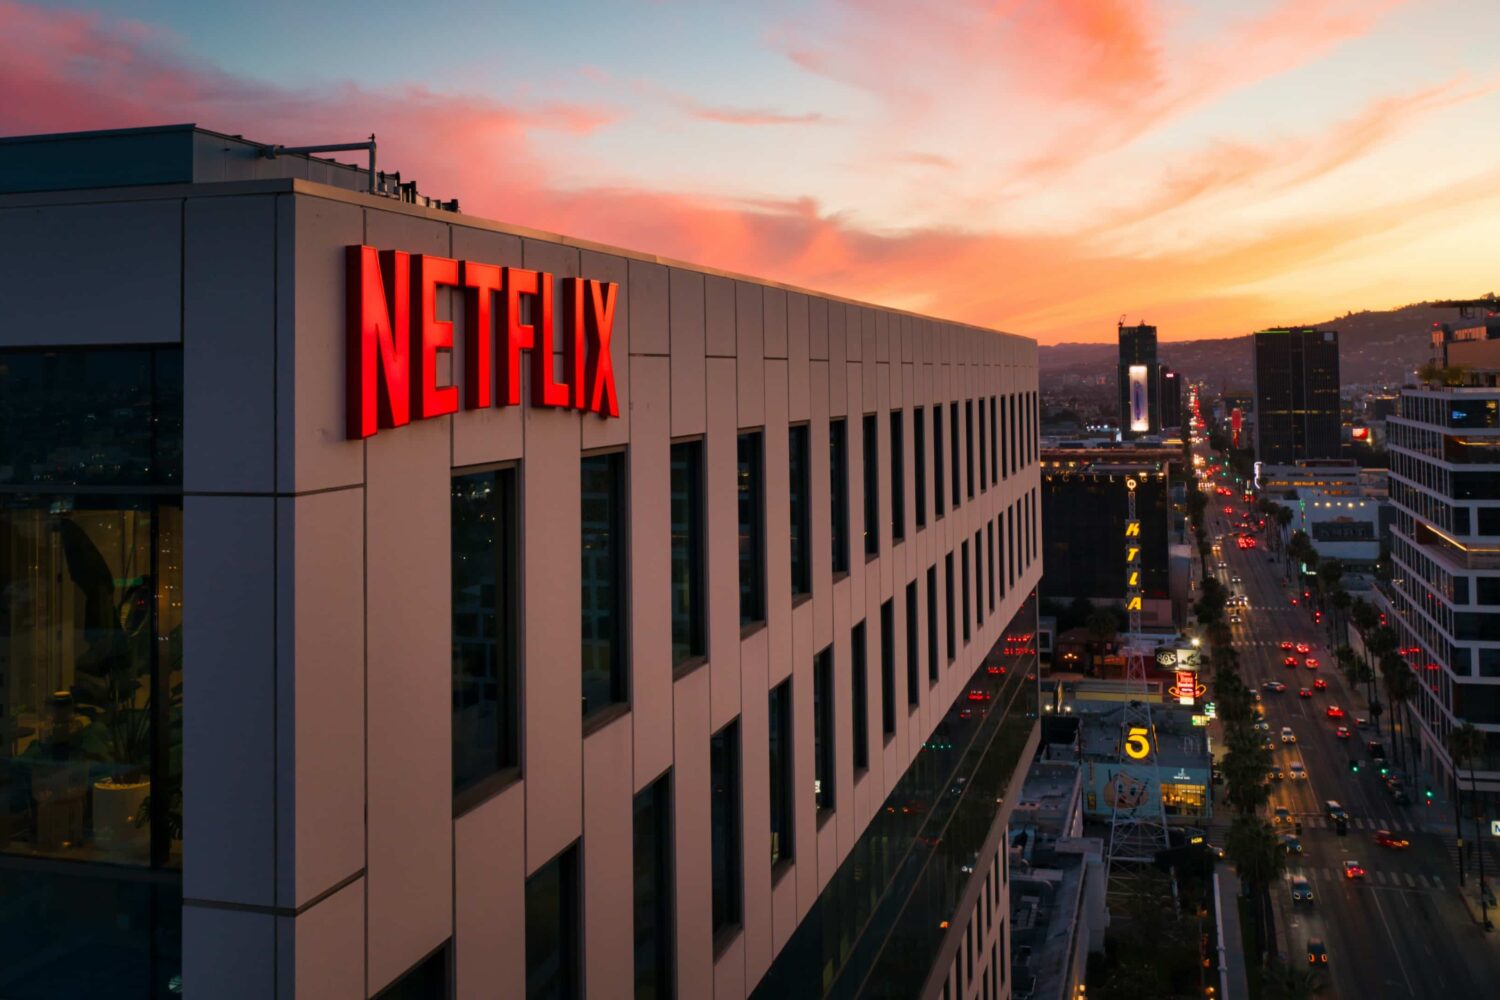 A Netflix logo sign on a building in Hollywood, Los Angeles at sunset